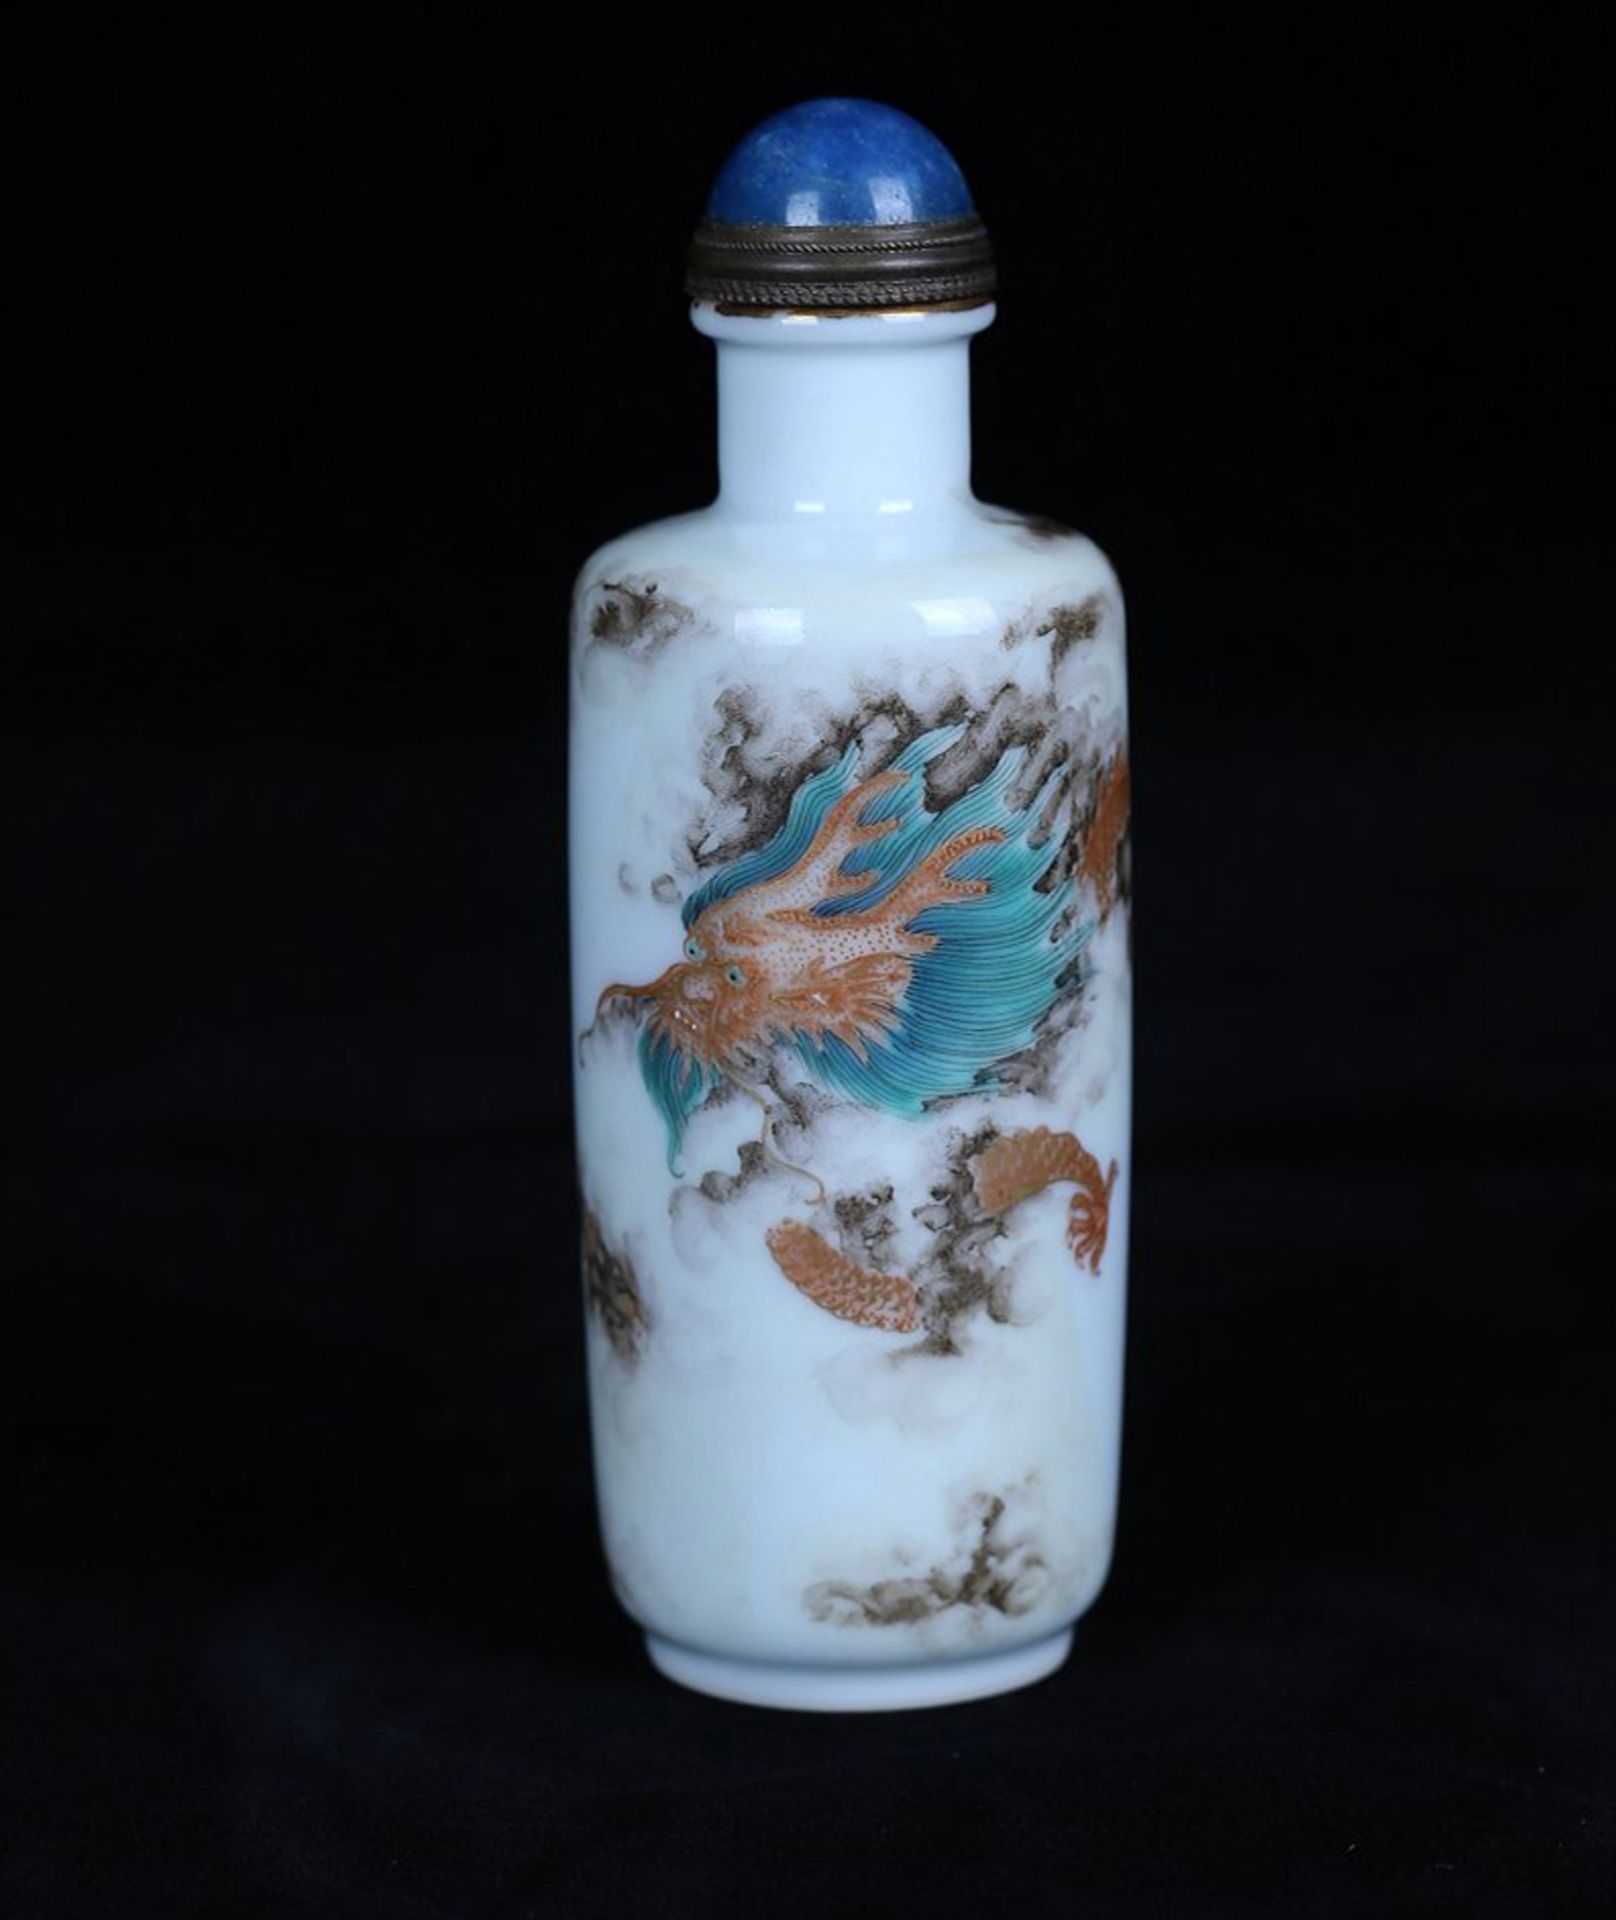 Trace the golden dragon barrel bong from the Qing Dynasty 